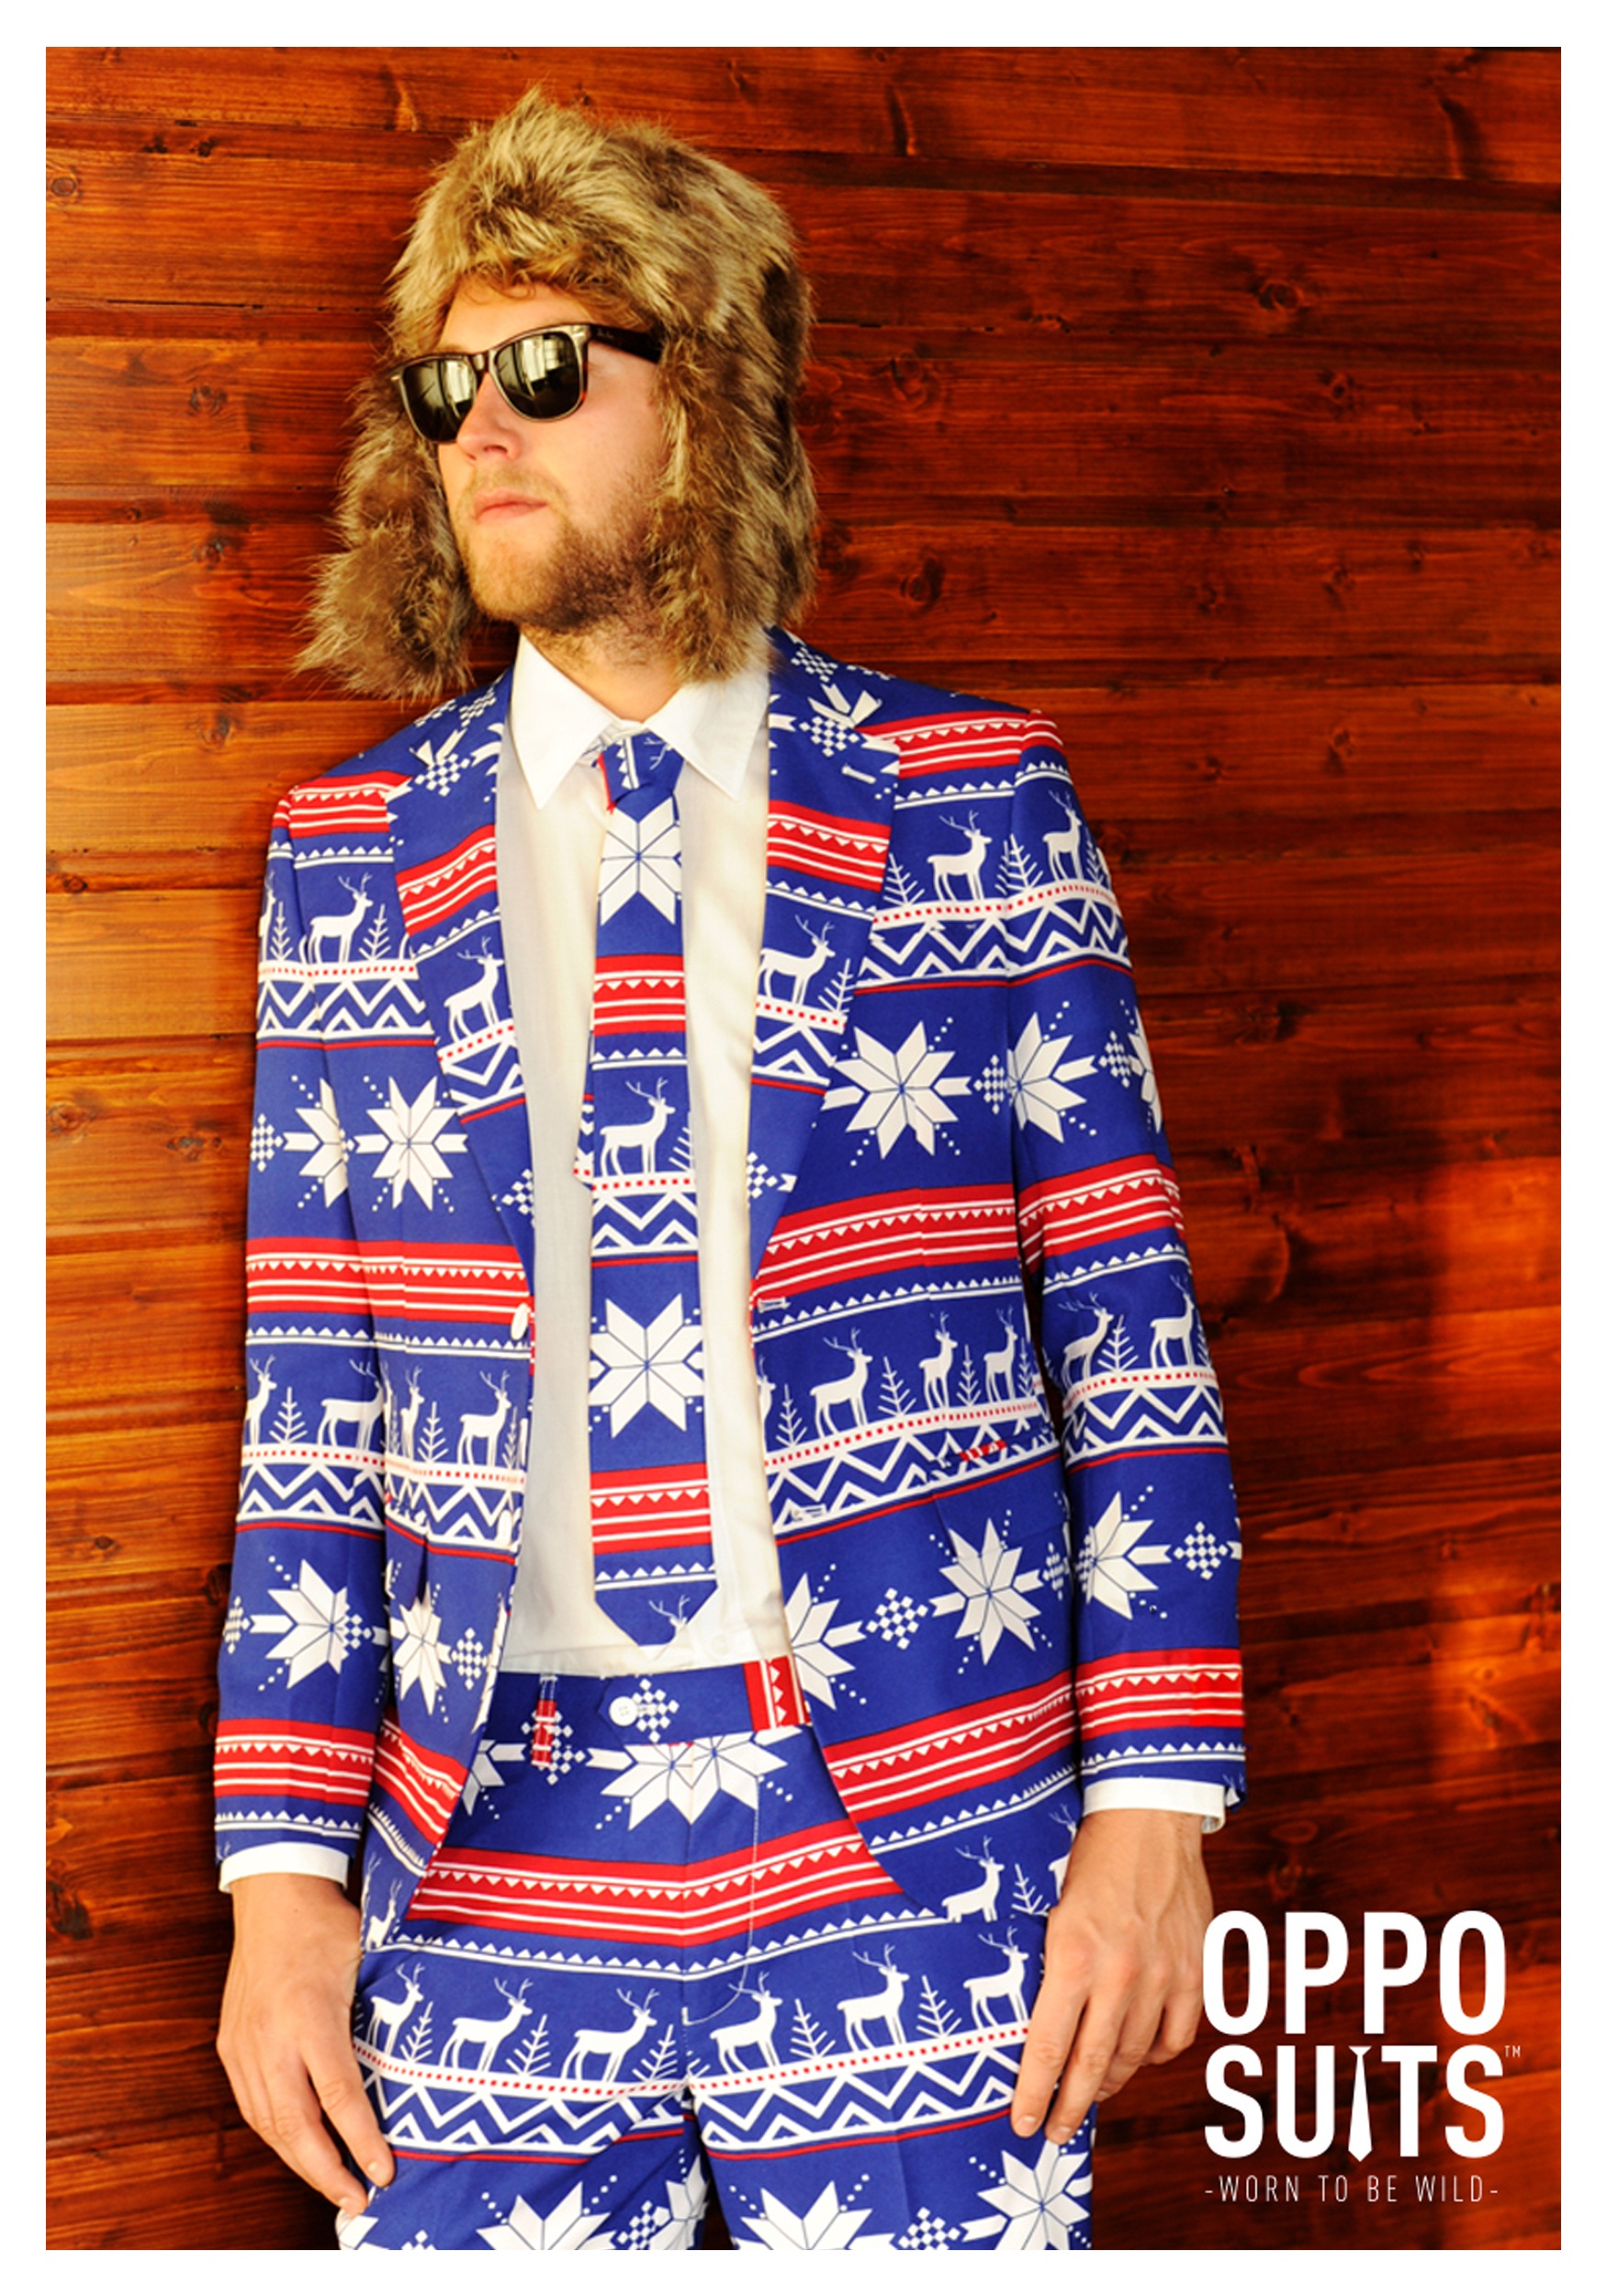 Blue Snowman,S Suitmeister Christmas Suits for Men in Different Prints Ugly Xmas Sweater Costumes Include Jacket Pants & Tie